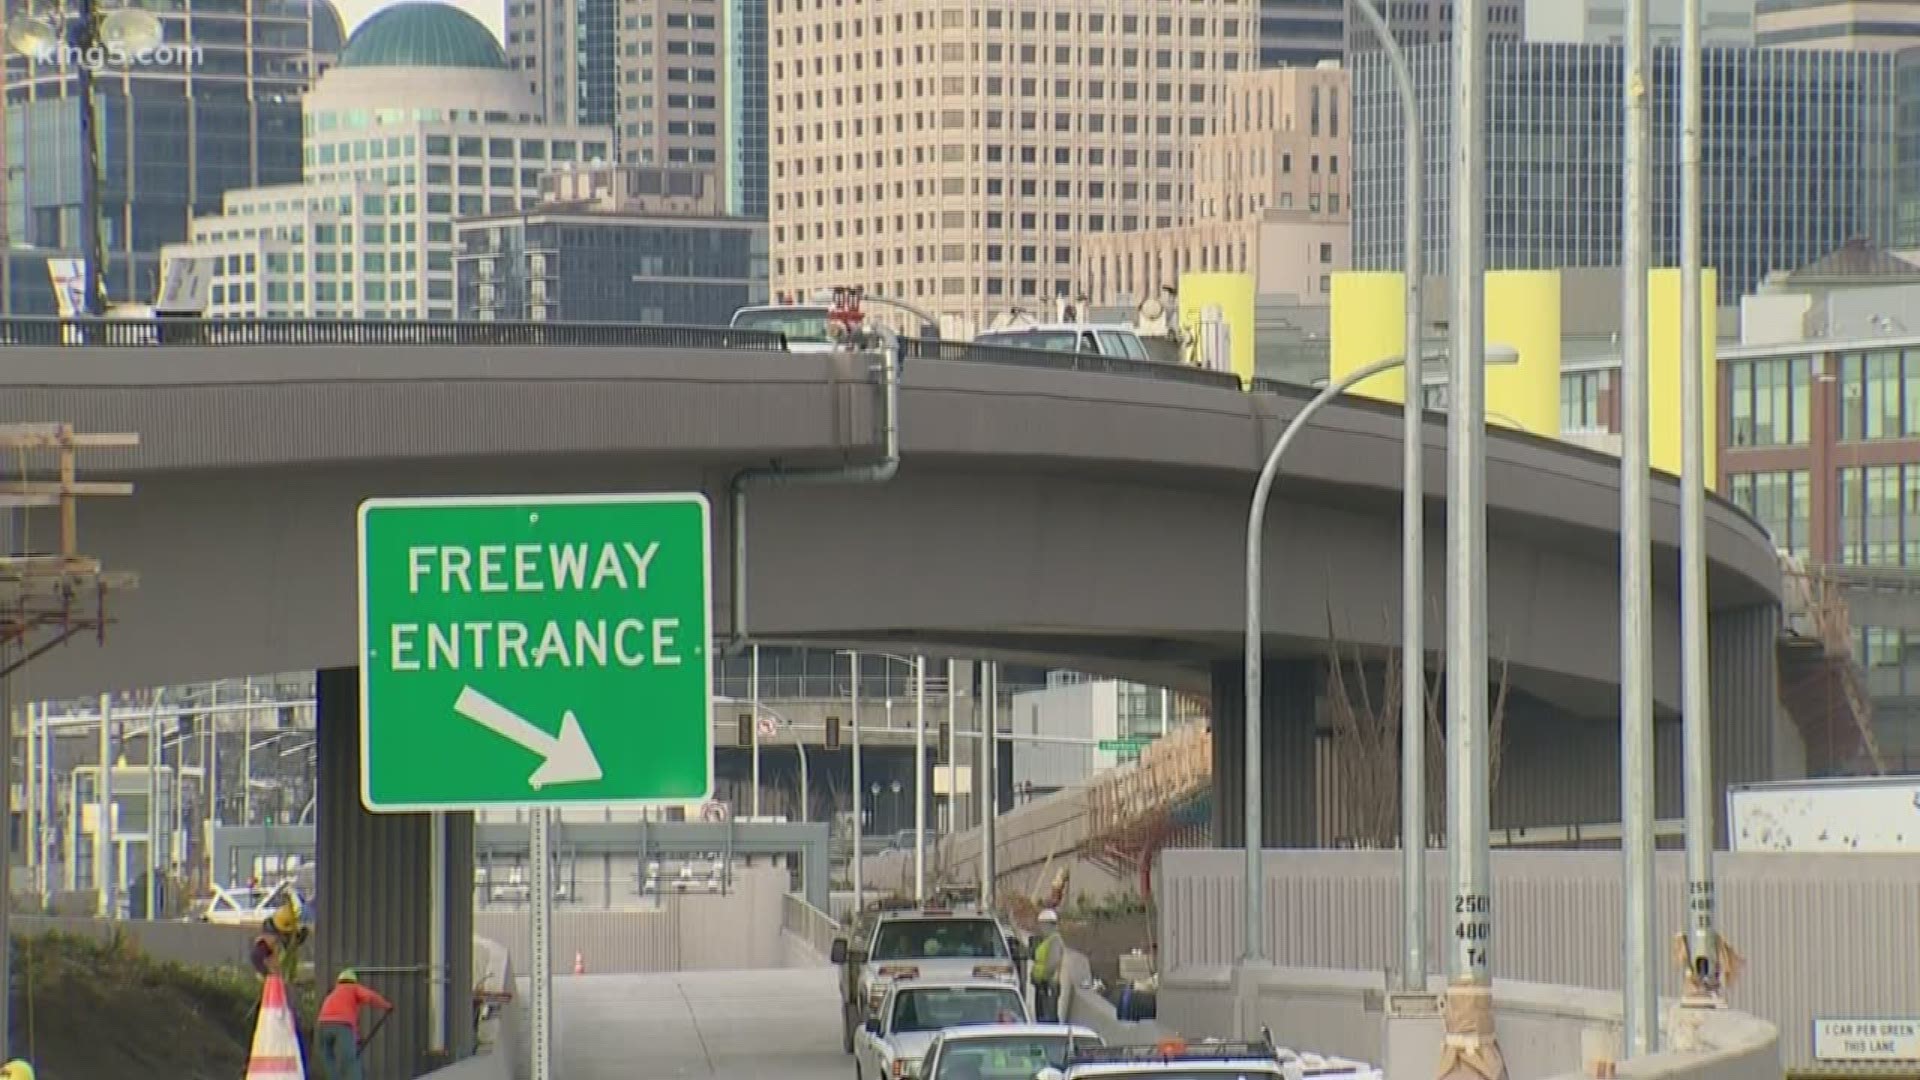 This weekend is the grand opening celebration for the new tunnel and then Monday morning by 5 a.m. It will be open for business! KING 5's Glenn Farley and Kaci Aitchison report.